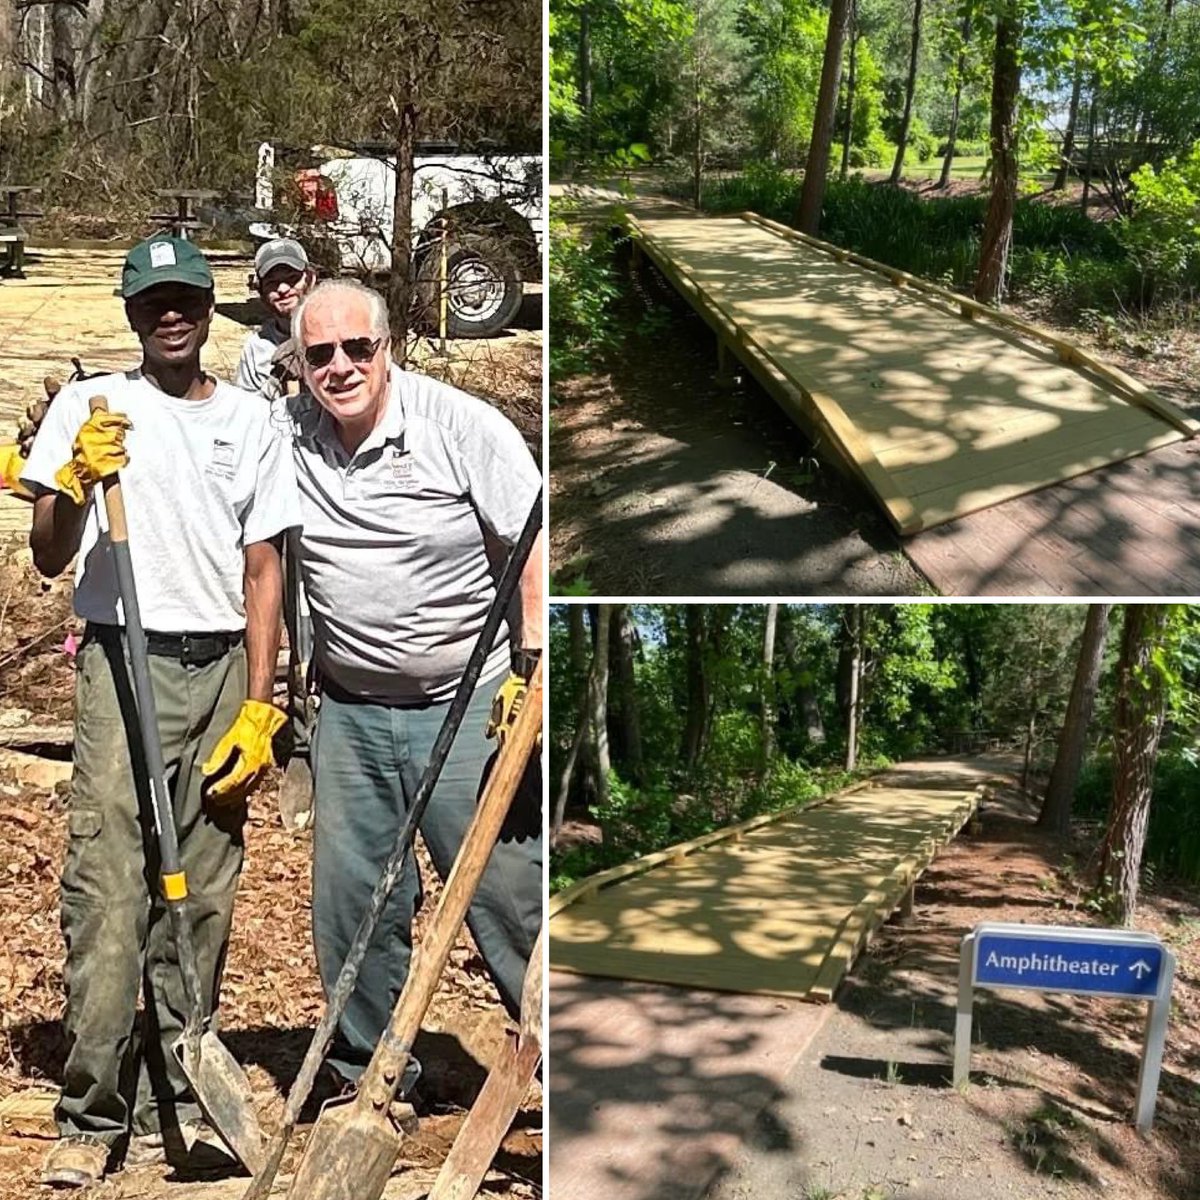 Park Operation's staff recently replaced the footbridge on the way to the amphitheater area at #YatesMill. The project took several days, and park staff were lucky to have the help of volunteers Bill Dubas and his son during the project. Thanks to all for their hard work!